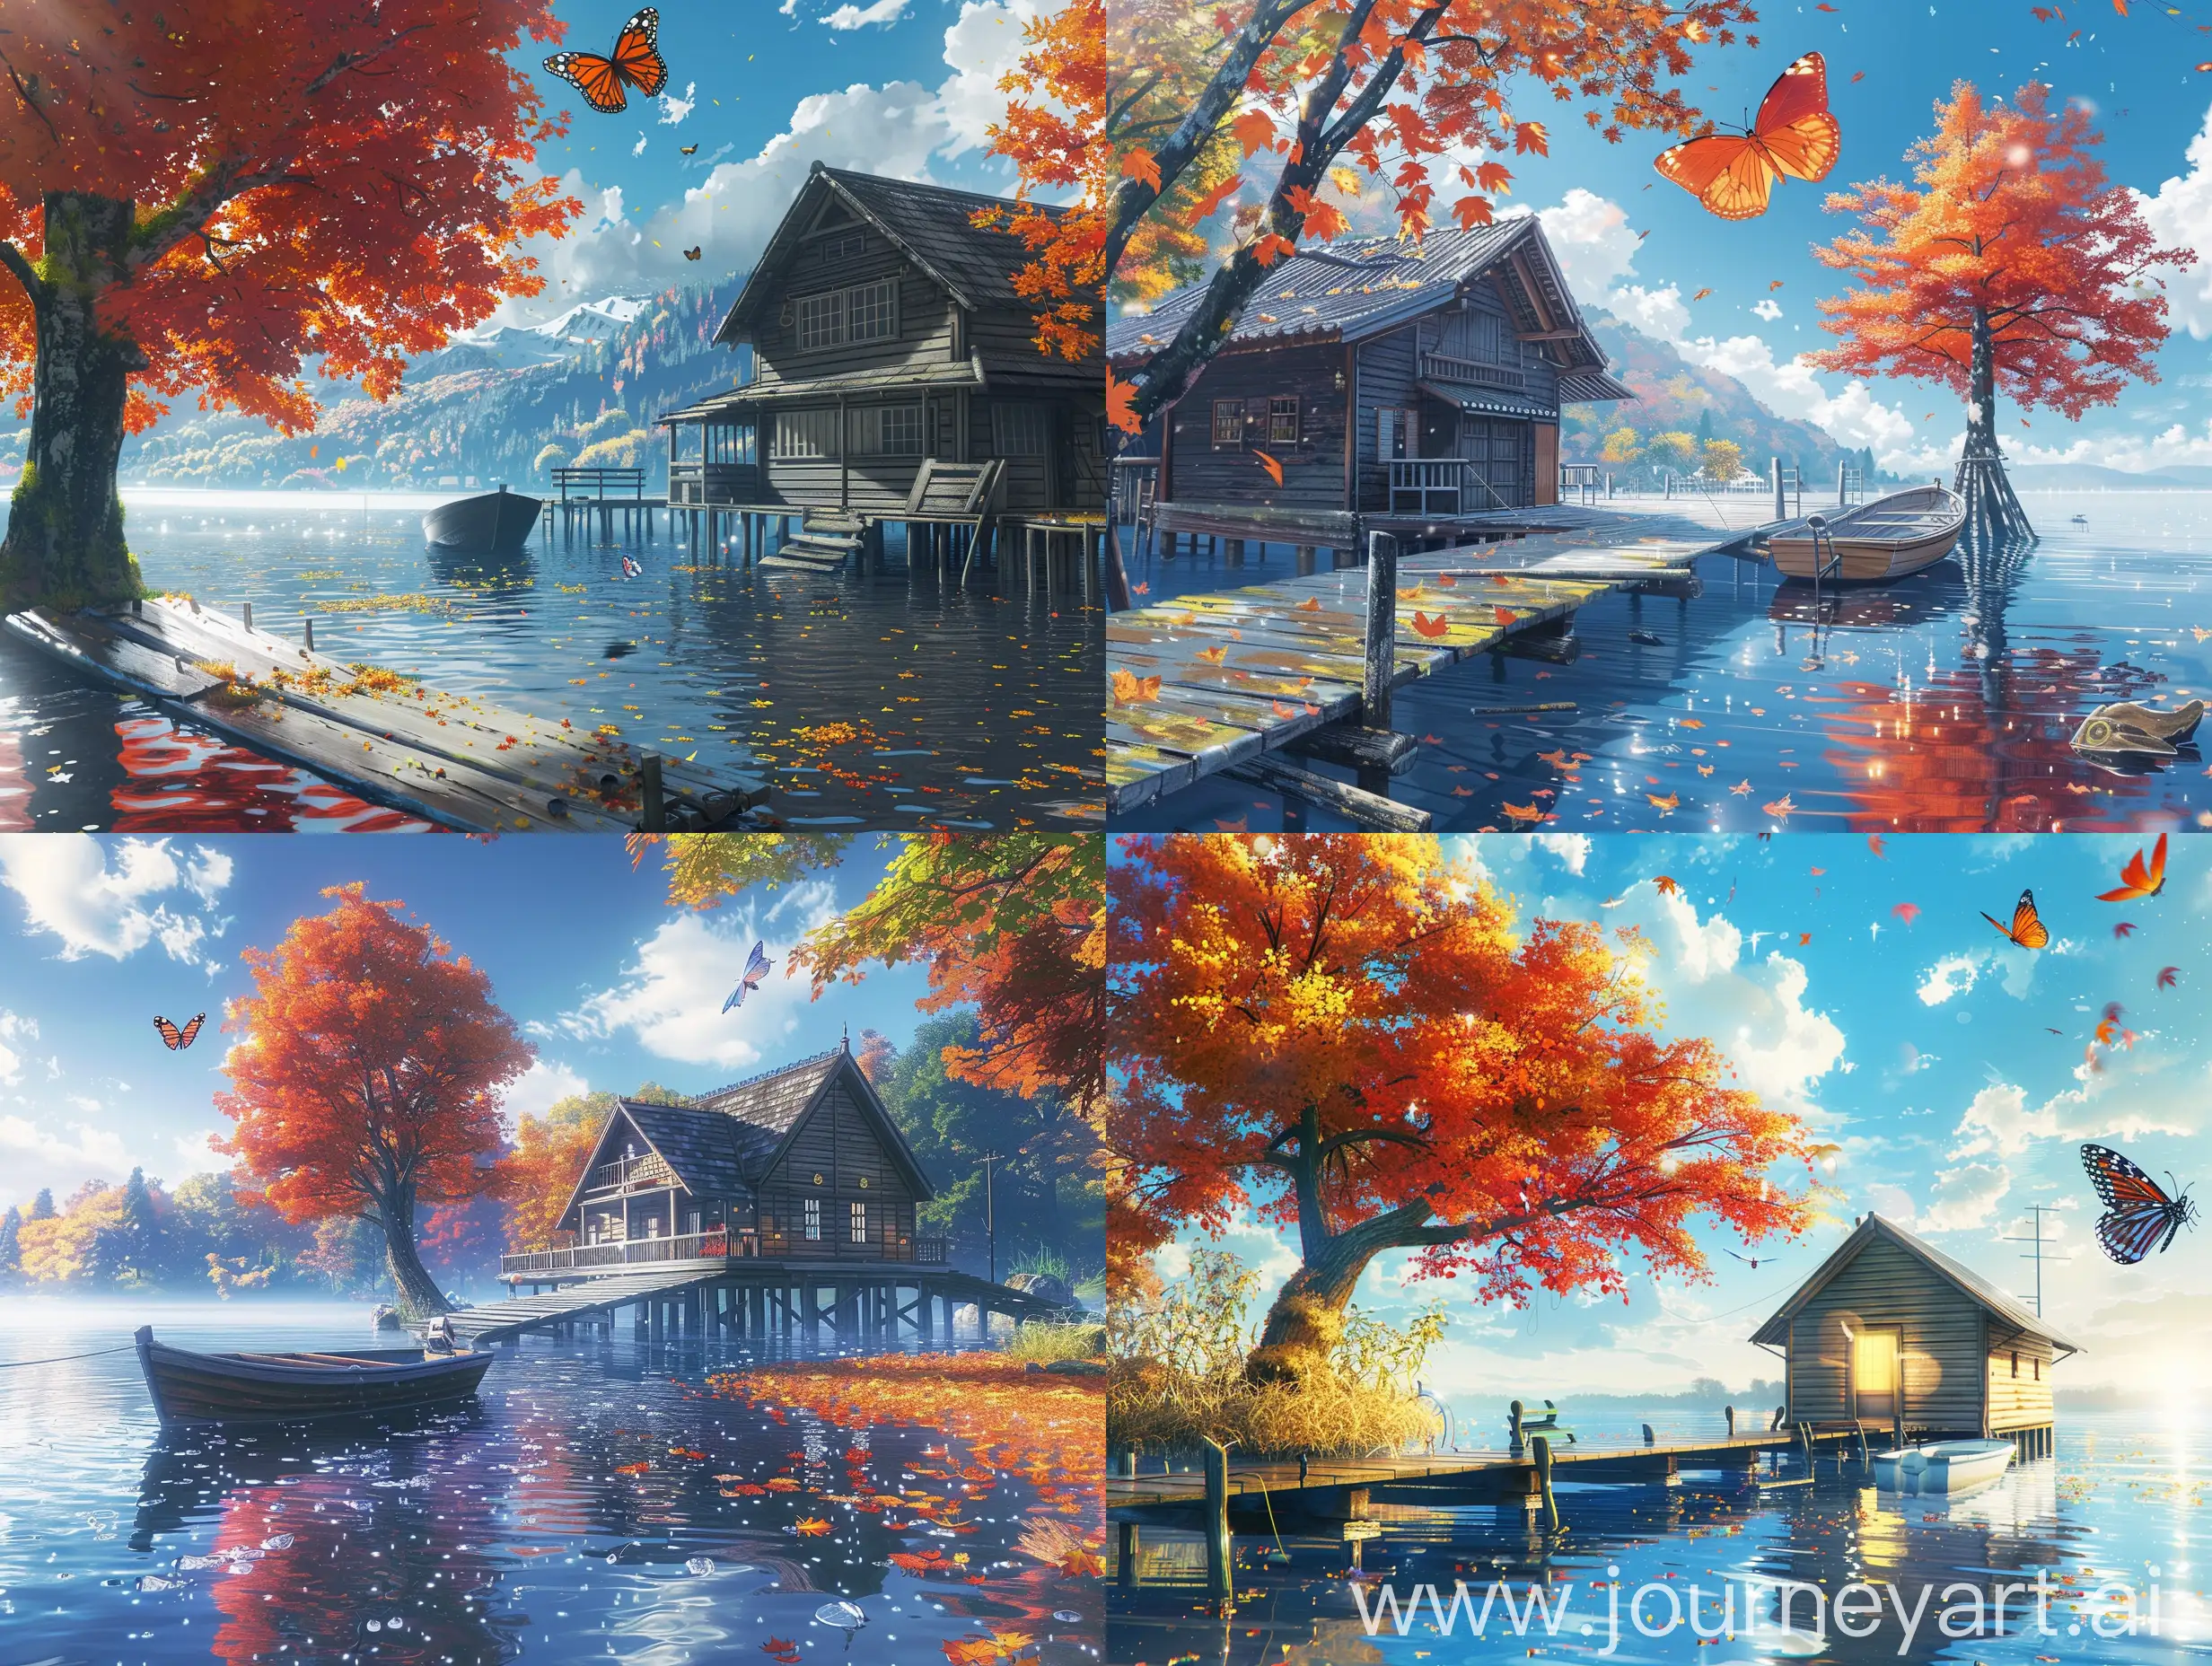 Cozy-Autumn-Anime-Scenery-Lake-House-Morning-with-Butterflies-and-Boats